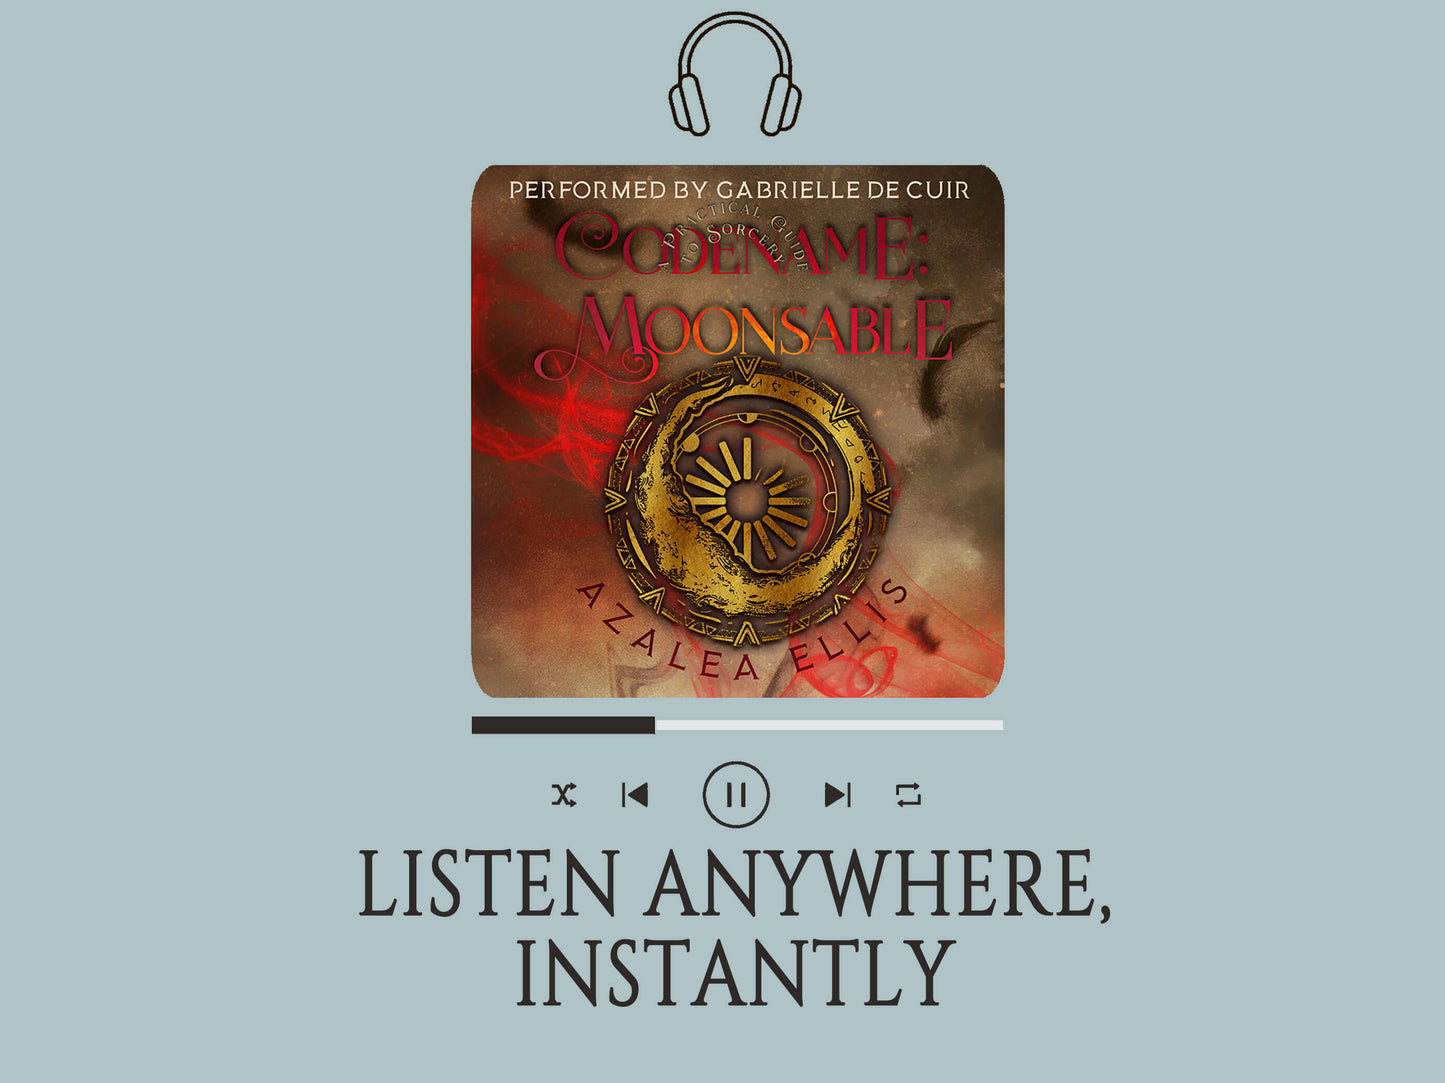 Audiobook of Codename Moonsable, Listen Anywhere instantly